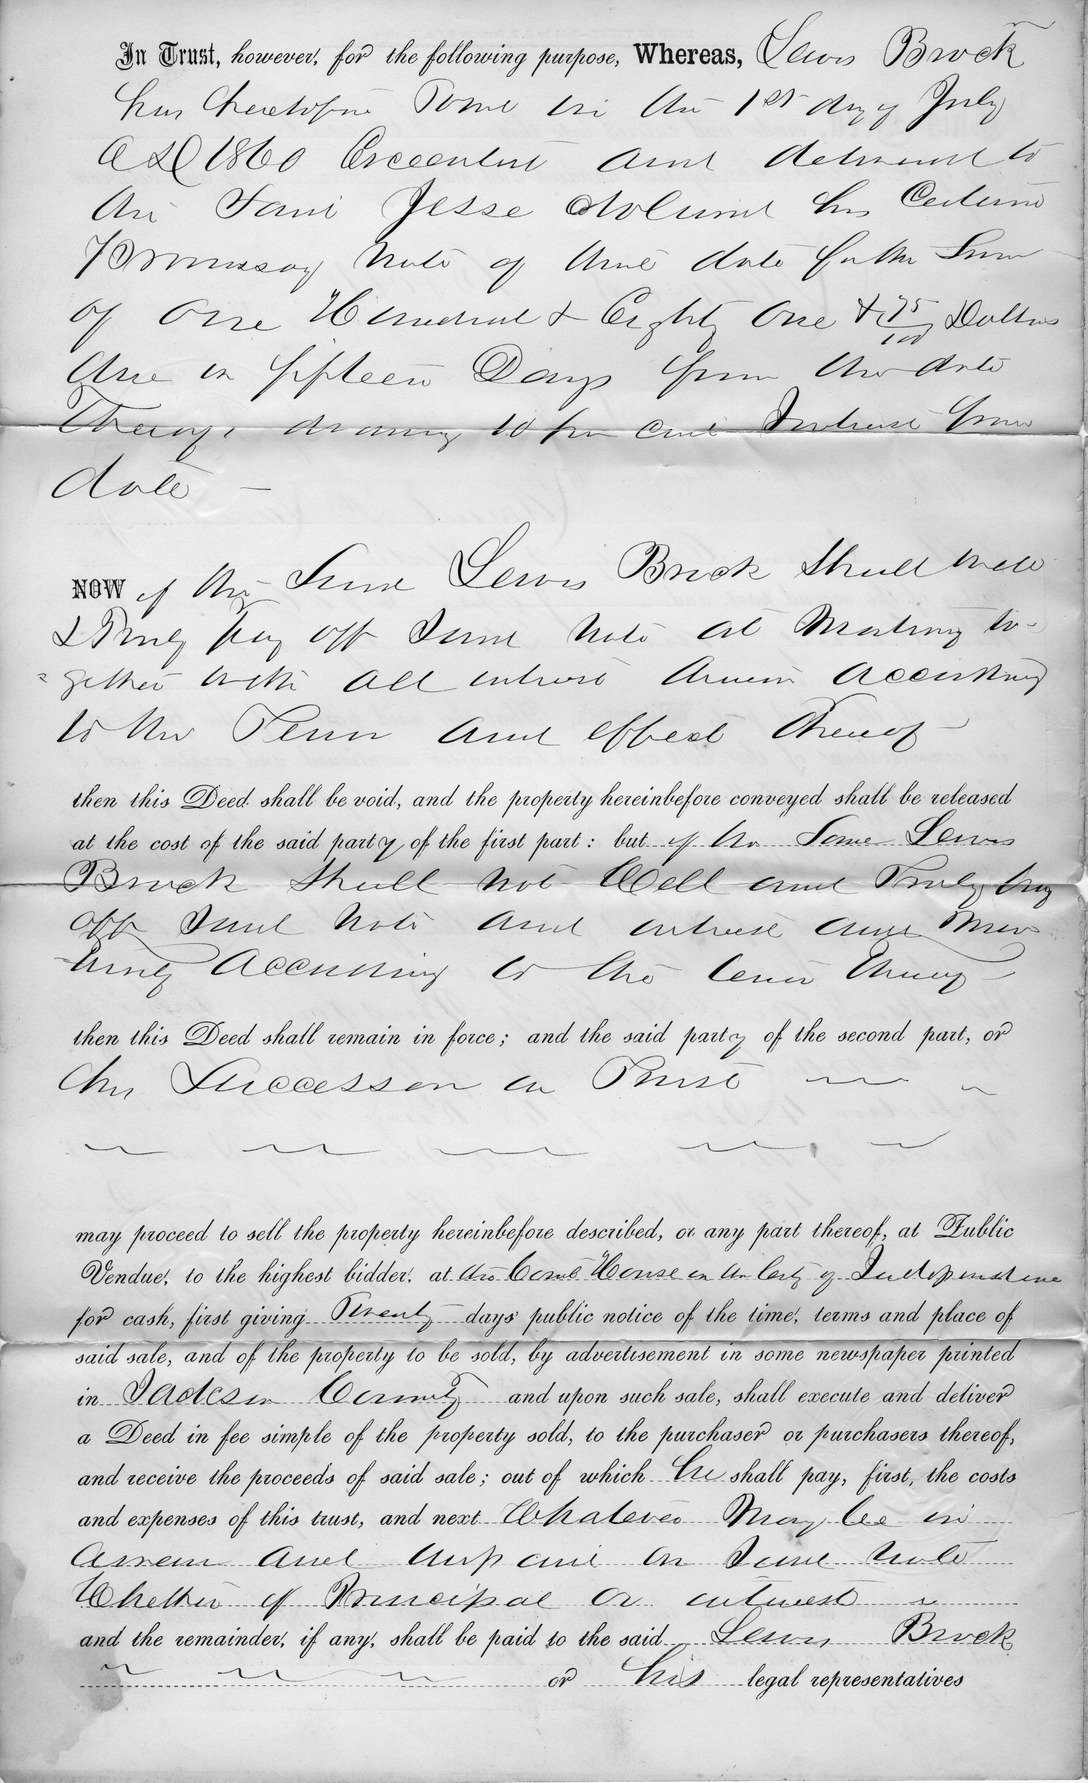 Deed of Trust from Lewis Brook to Jesse Noland